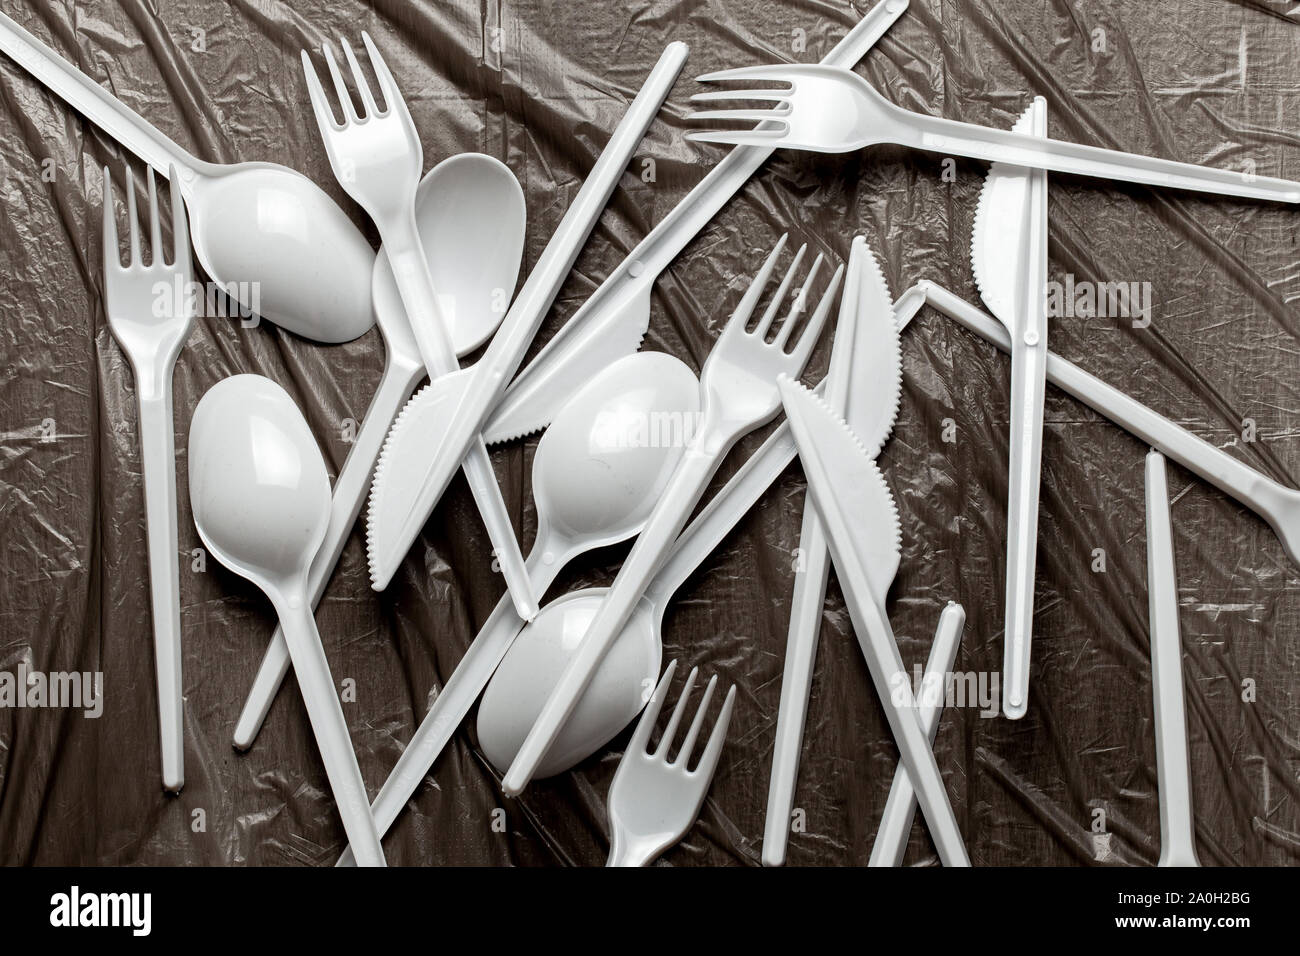 Plastic cutlery, forks, spoons and knives. Pollution of the environment with plastic and microplastics. Black plastic background. Stock Photo